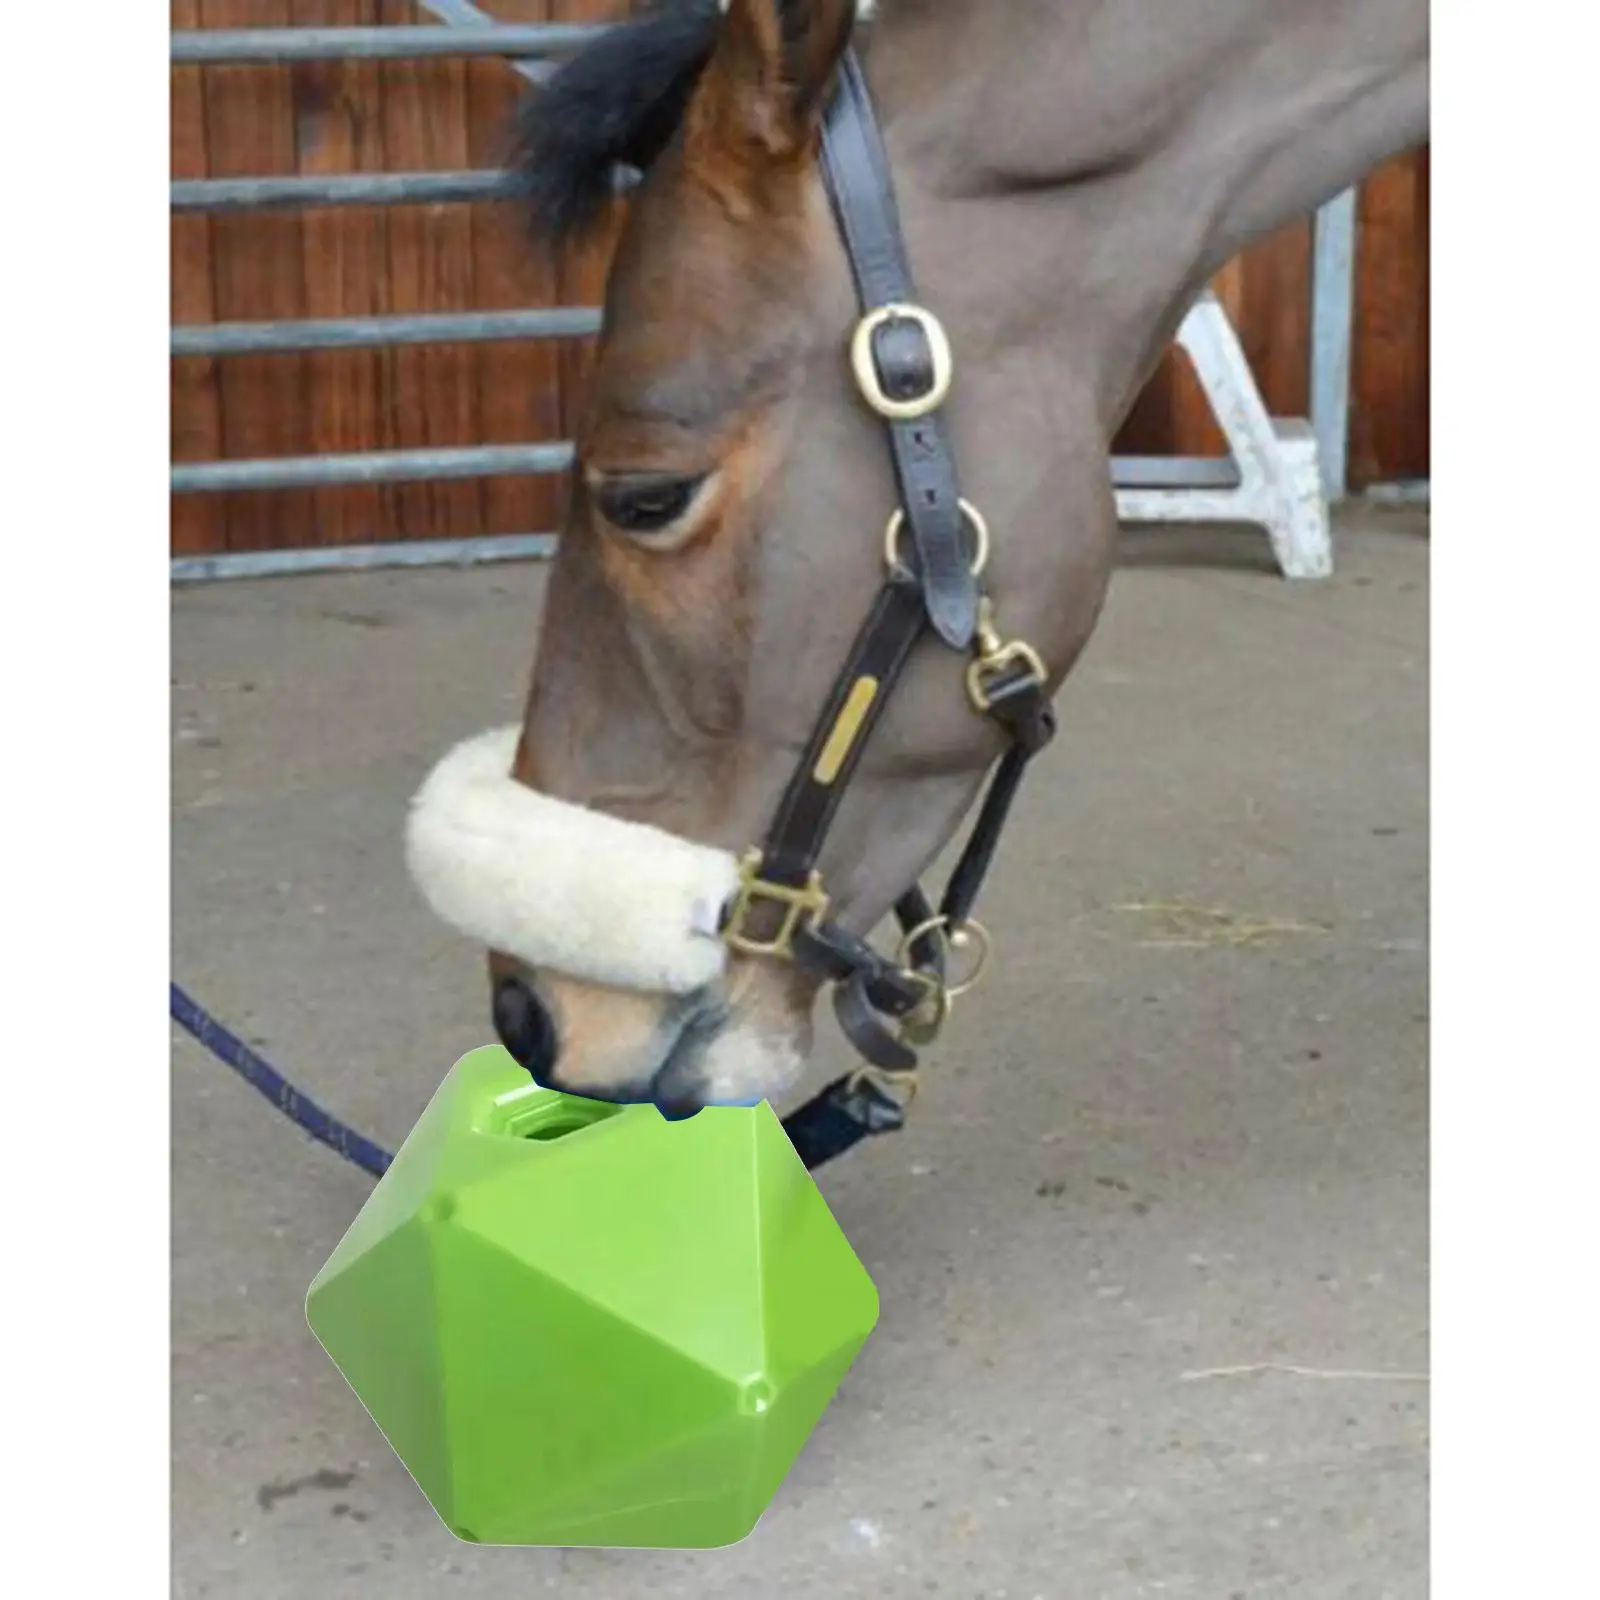 Funny Horse Treat Ball Feeding Toys Relieve Boredom Stress Feeder Stable Stall Equestrian Accessories Snack Ball for Sheep Yard